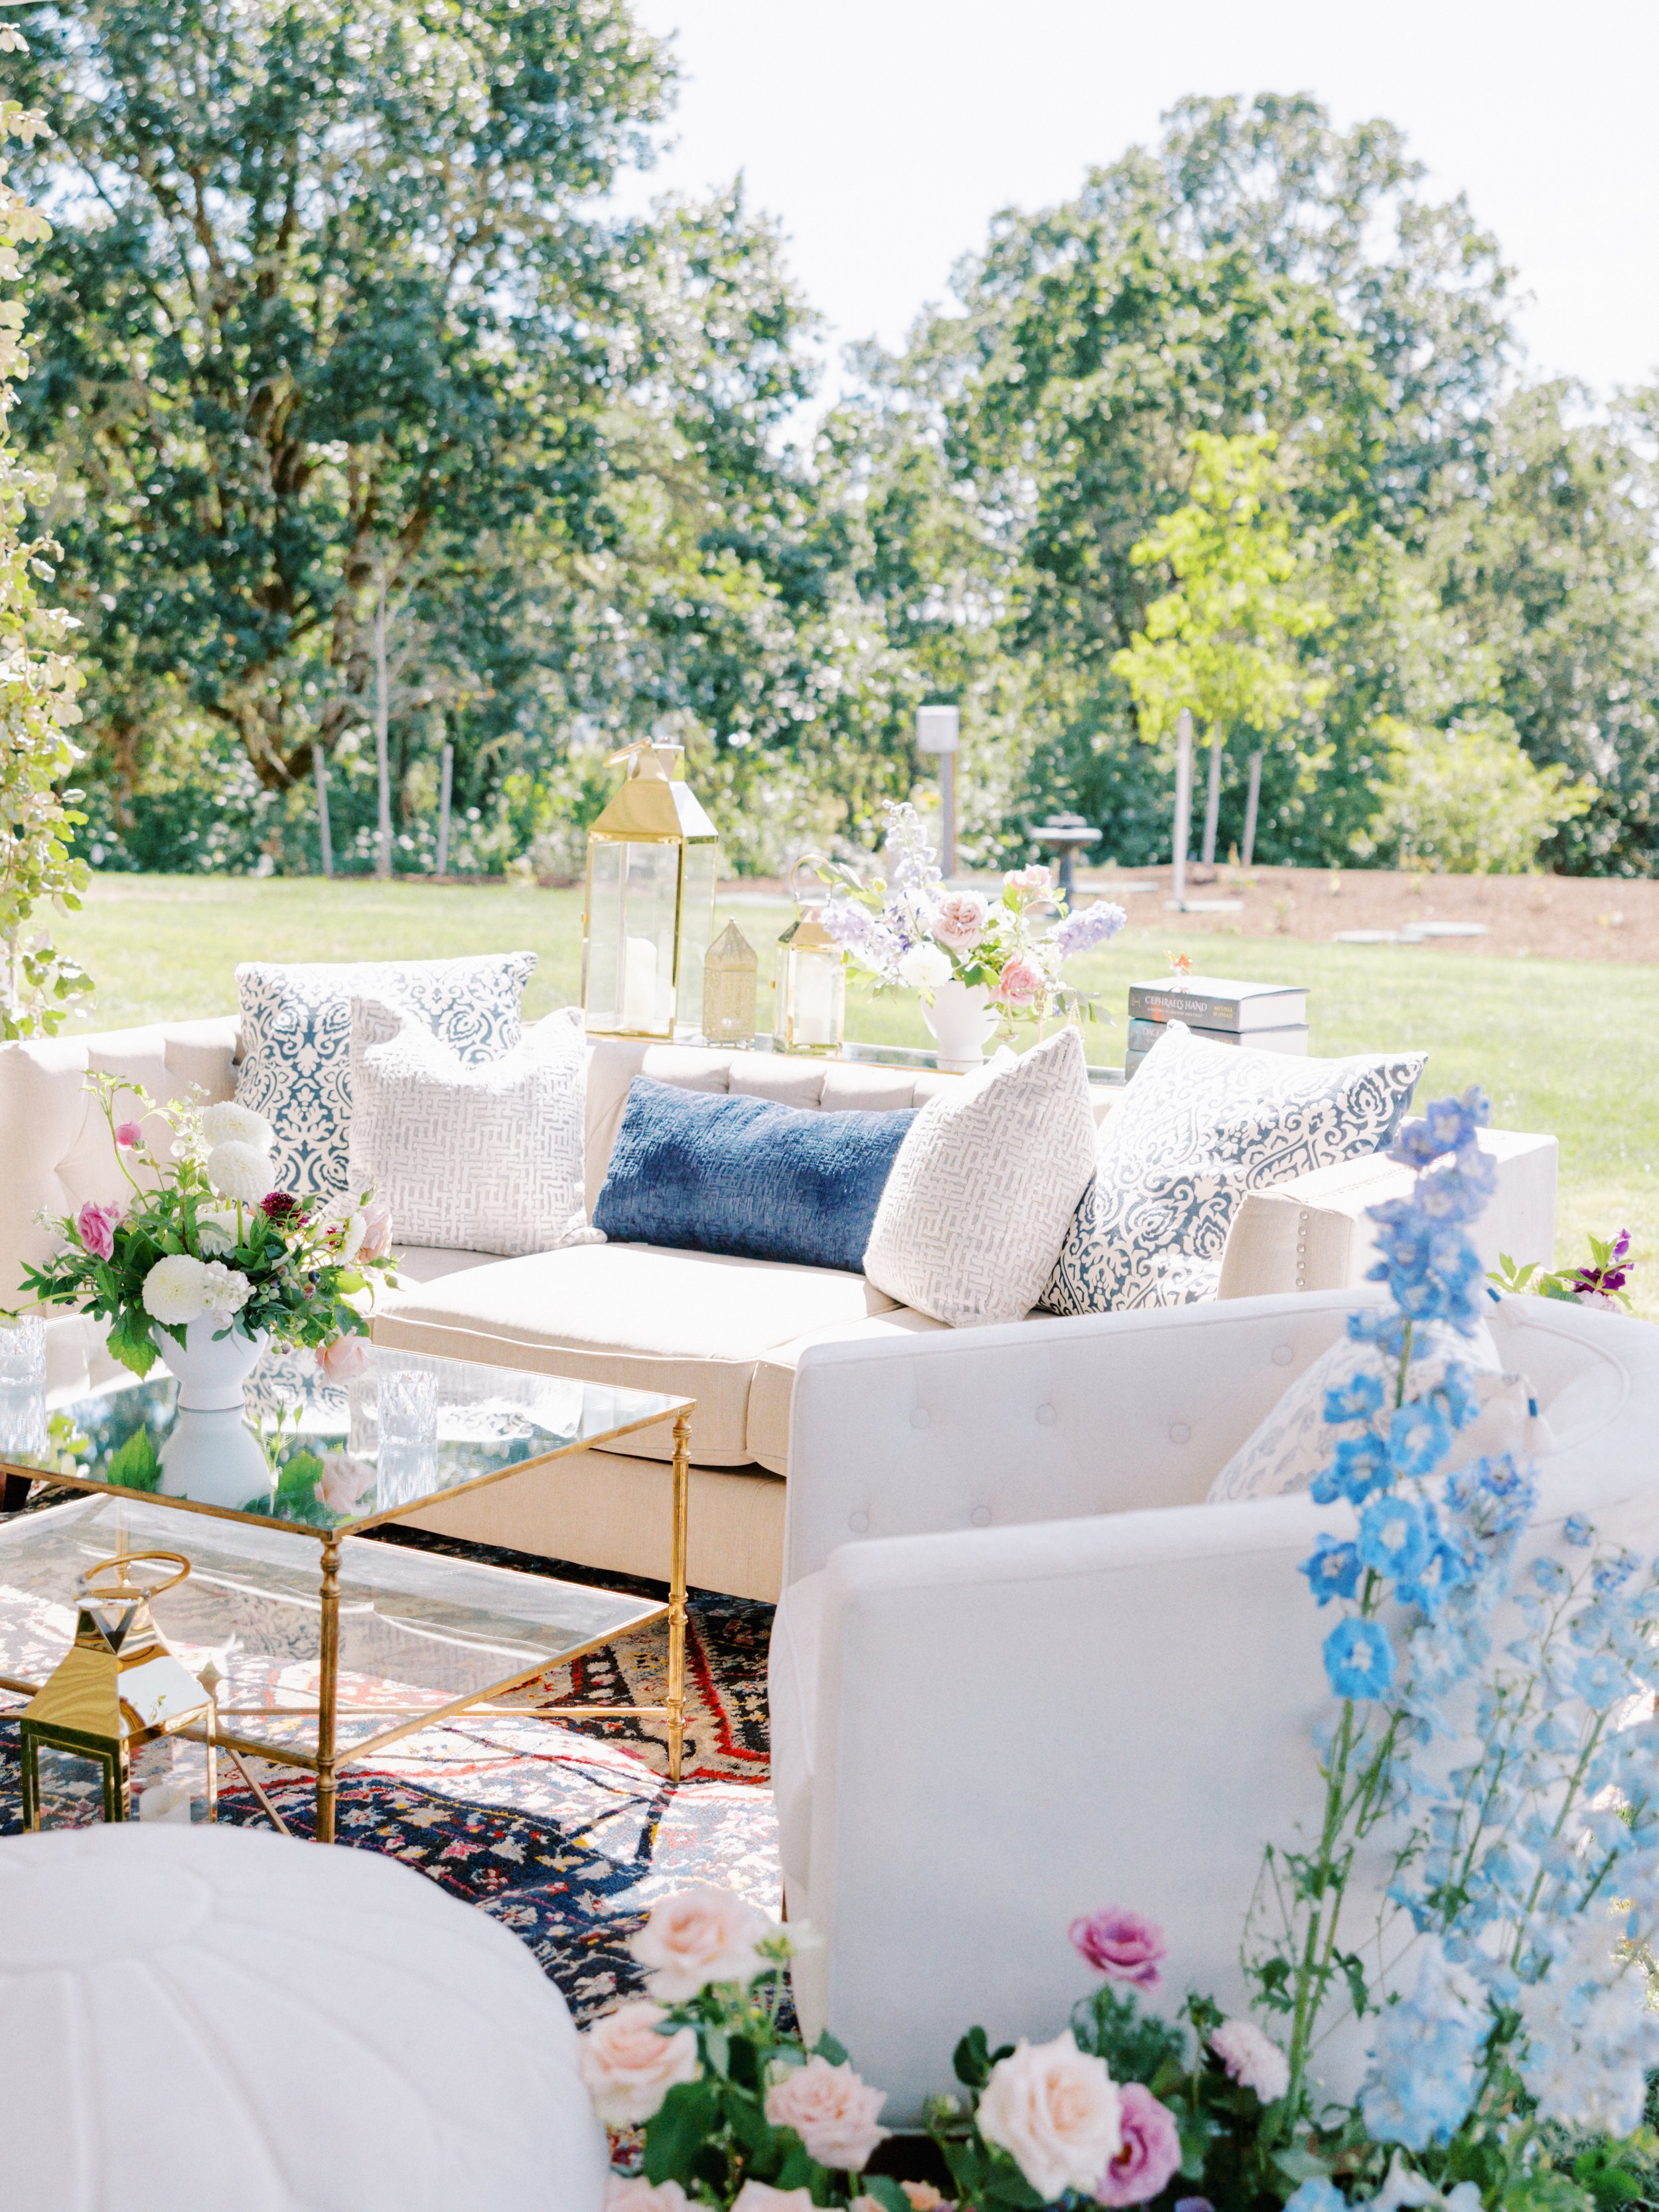 Outdoor seating at a wedding reception by wedding planning service Bridal Bliss.